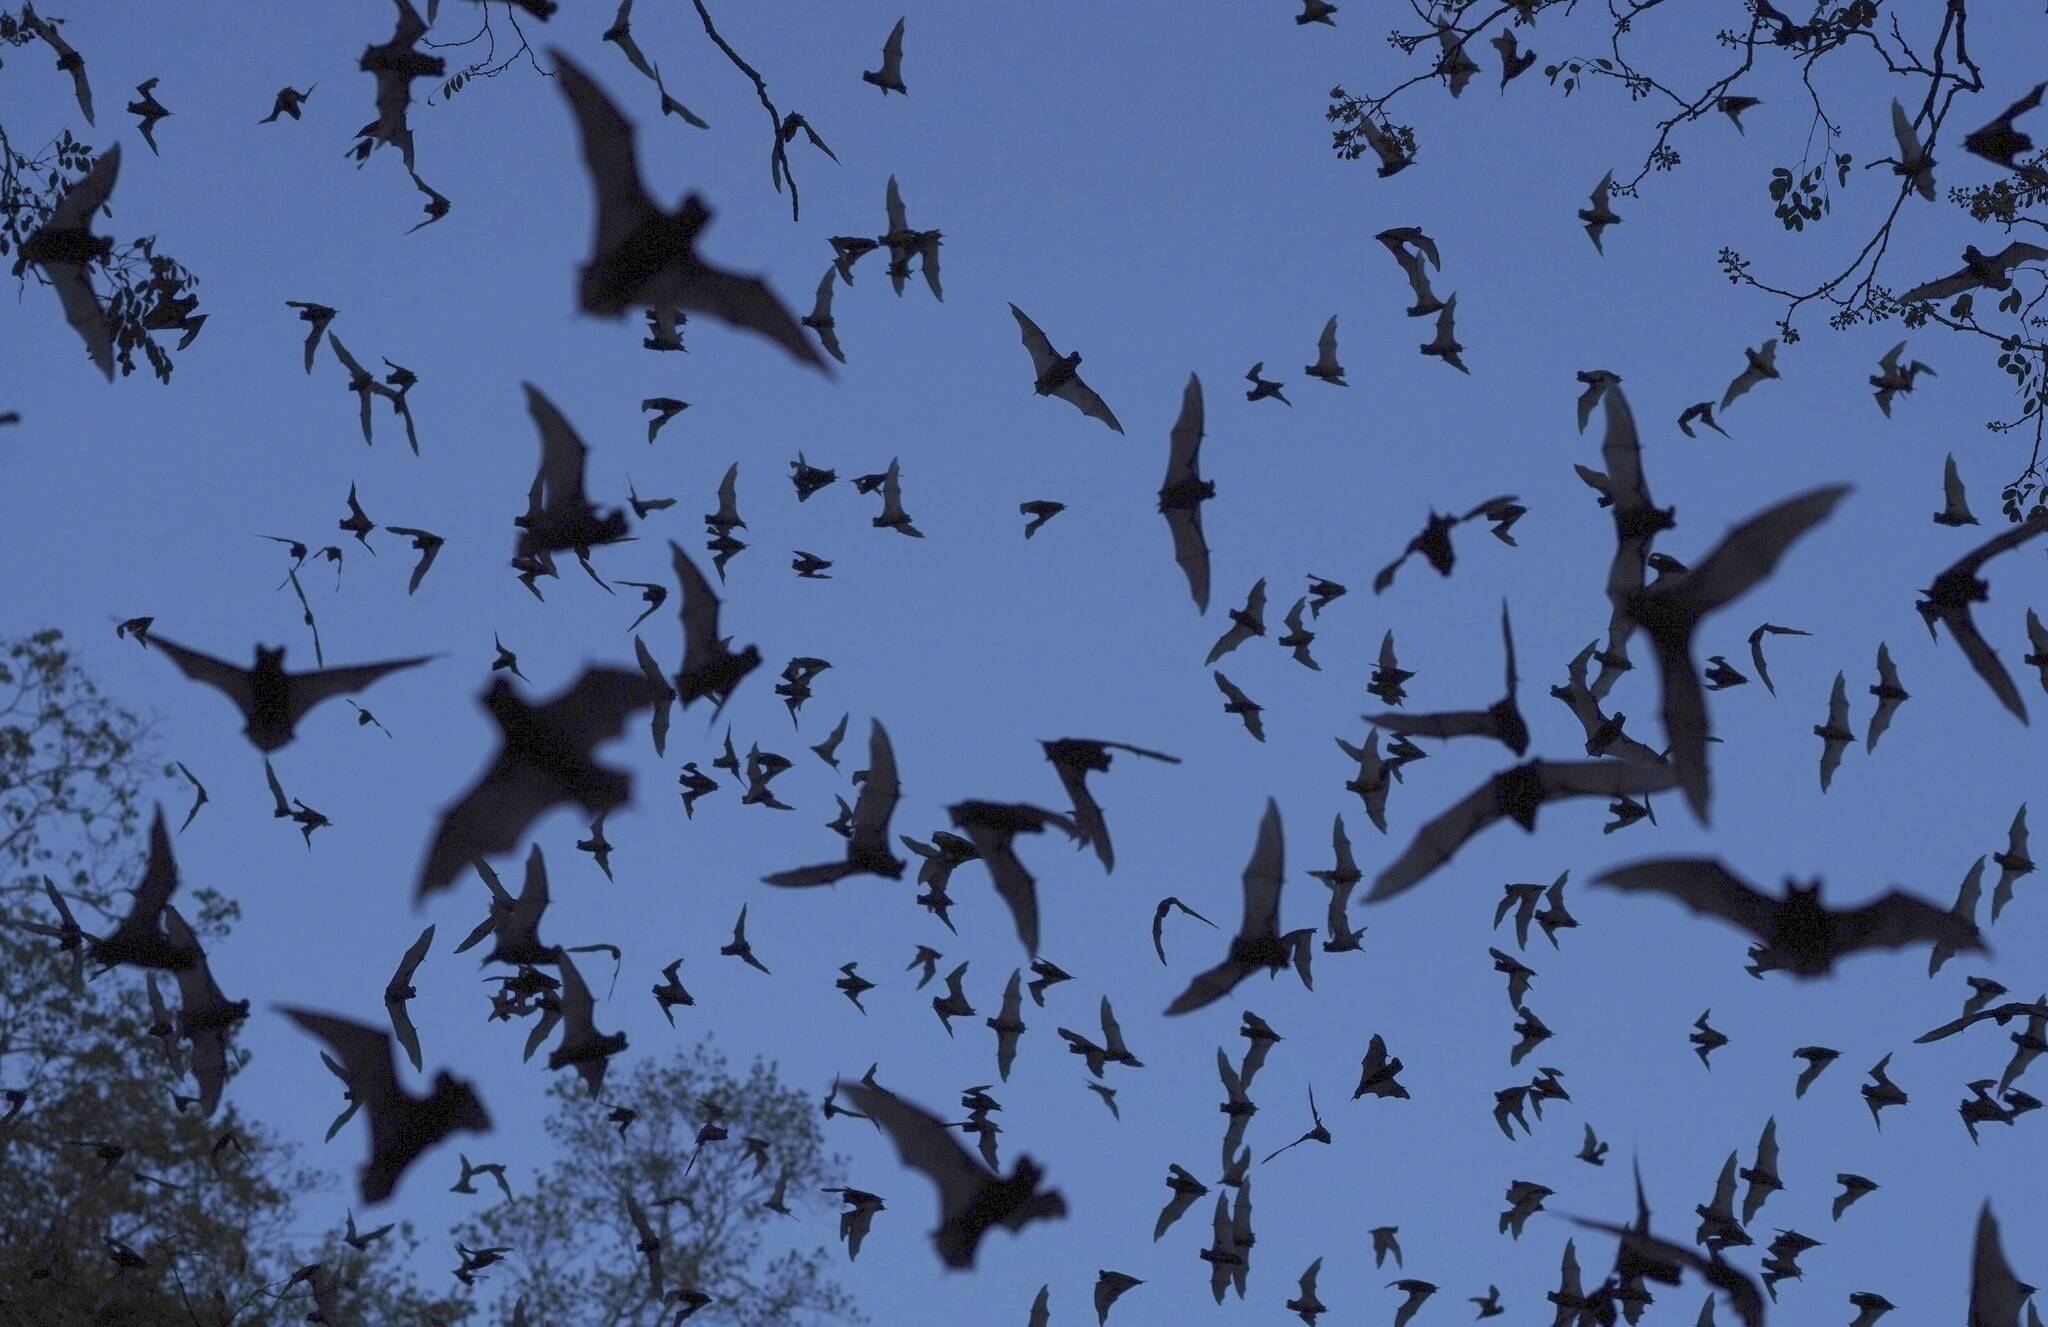 Bats come out of the Volcan de los Murcielagos, a cave that is home to three million bats, in the Balam-Ku reserve, in the Yucatan Peninsula of Mexico, on Wednesday, Jan. 11, 2023. One version of the Maya Train plan had the tracks passing less than a half mile from the bat cave. (AP Photo/Marco Ugarte)